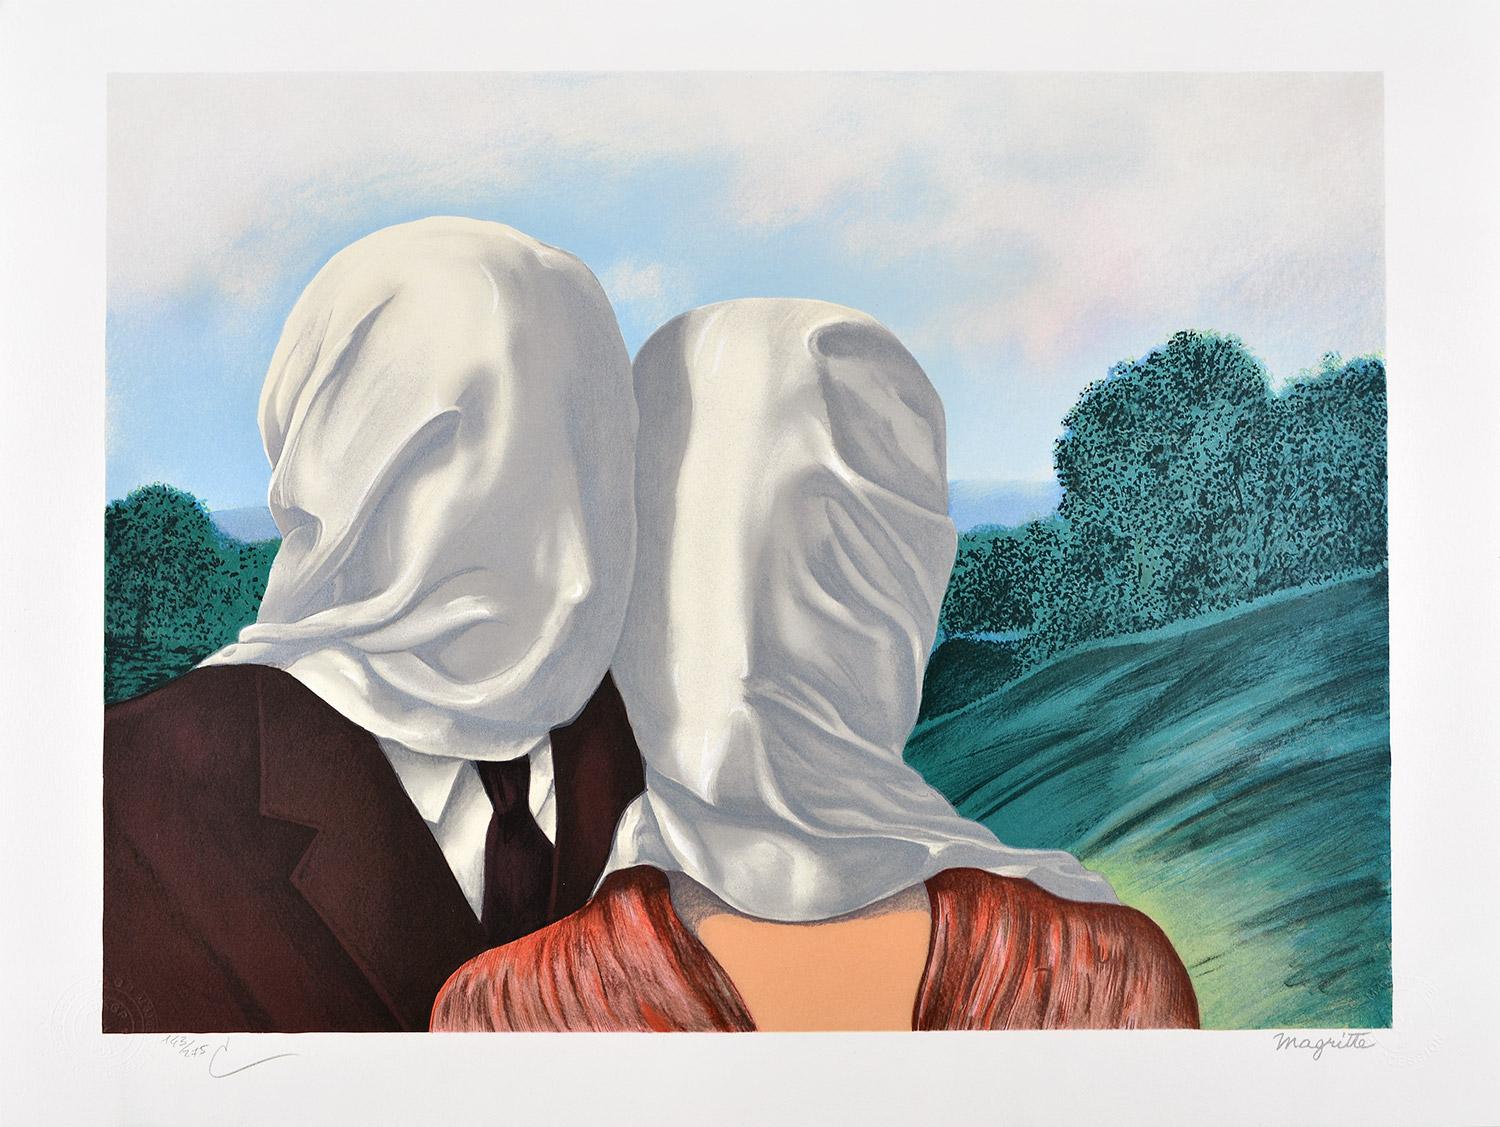 (after) René Magritte Abstract Print - René Magritte - LES AMANTS Limited Surrealism French Art Contemporary